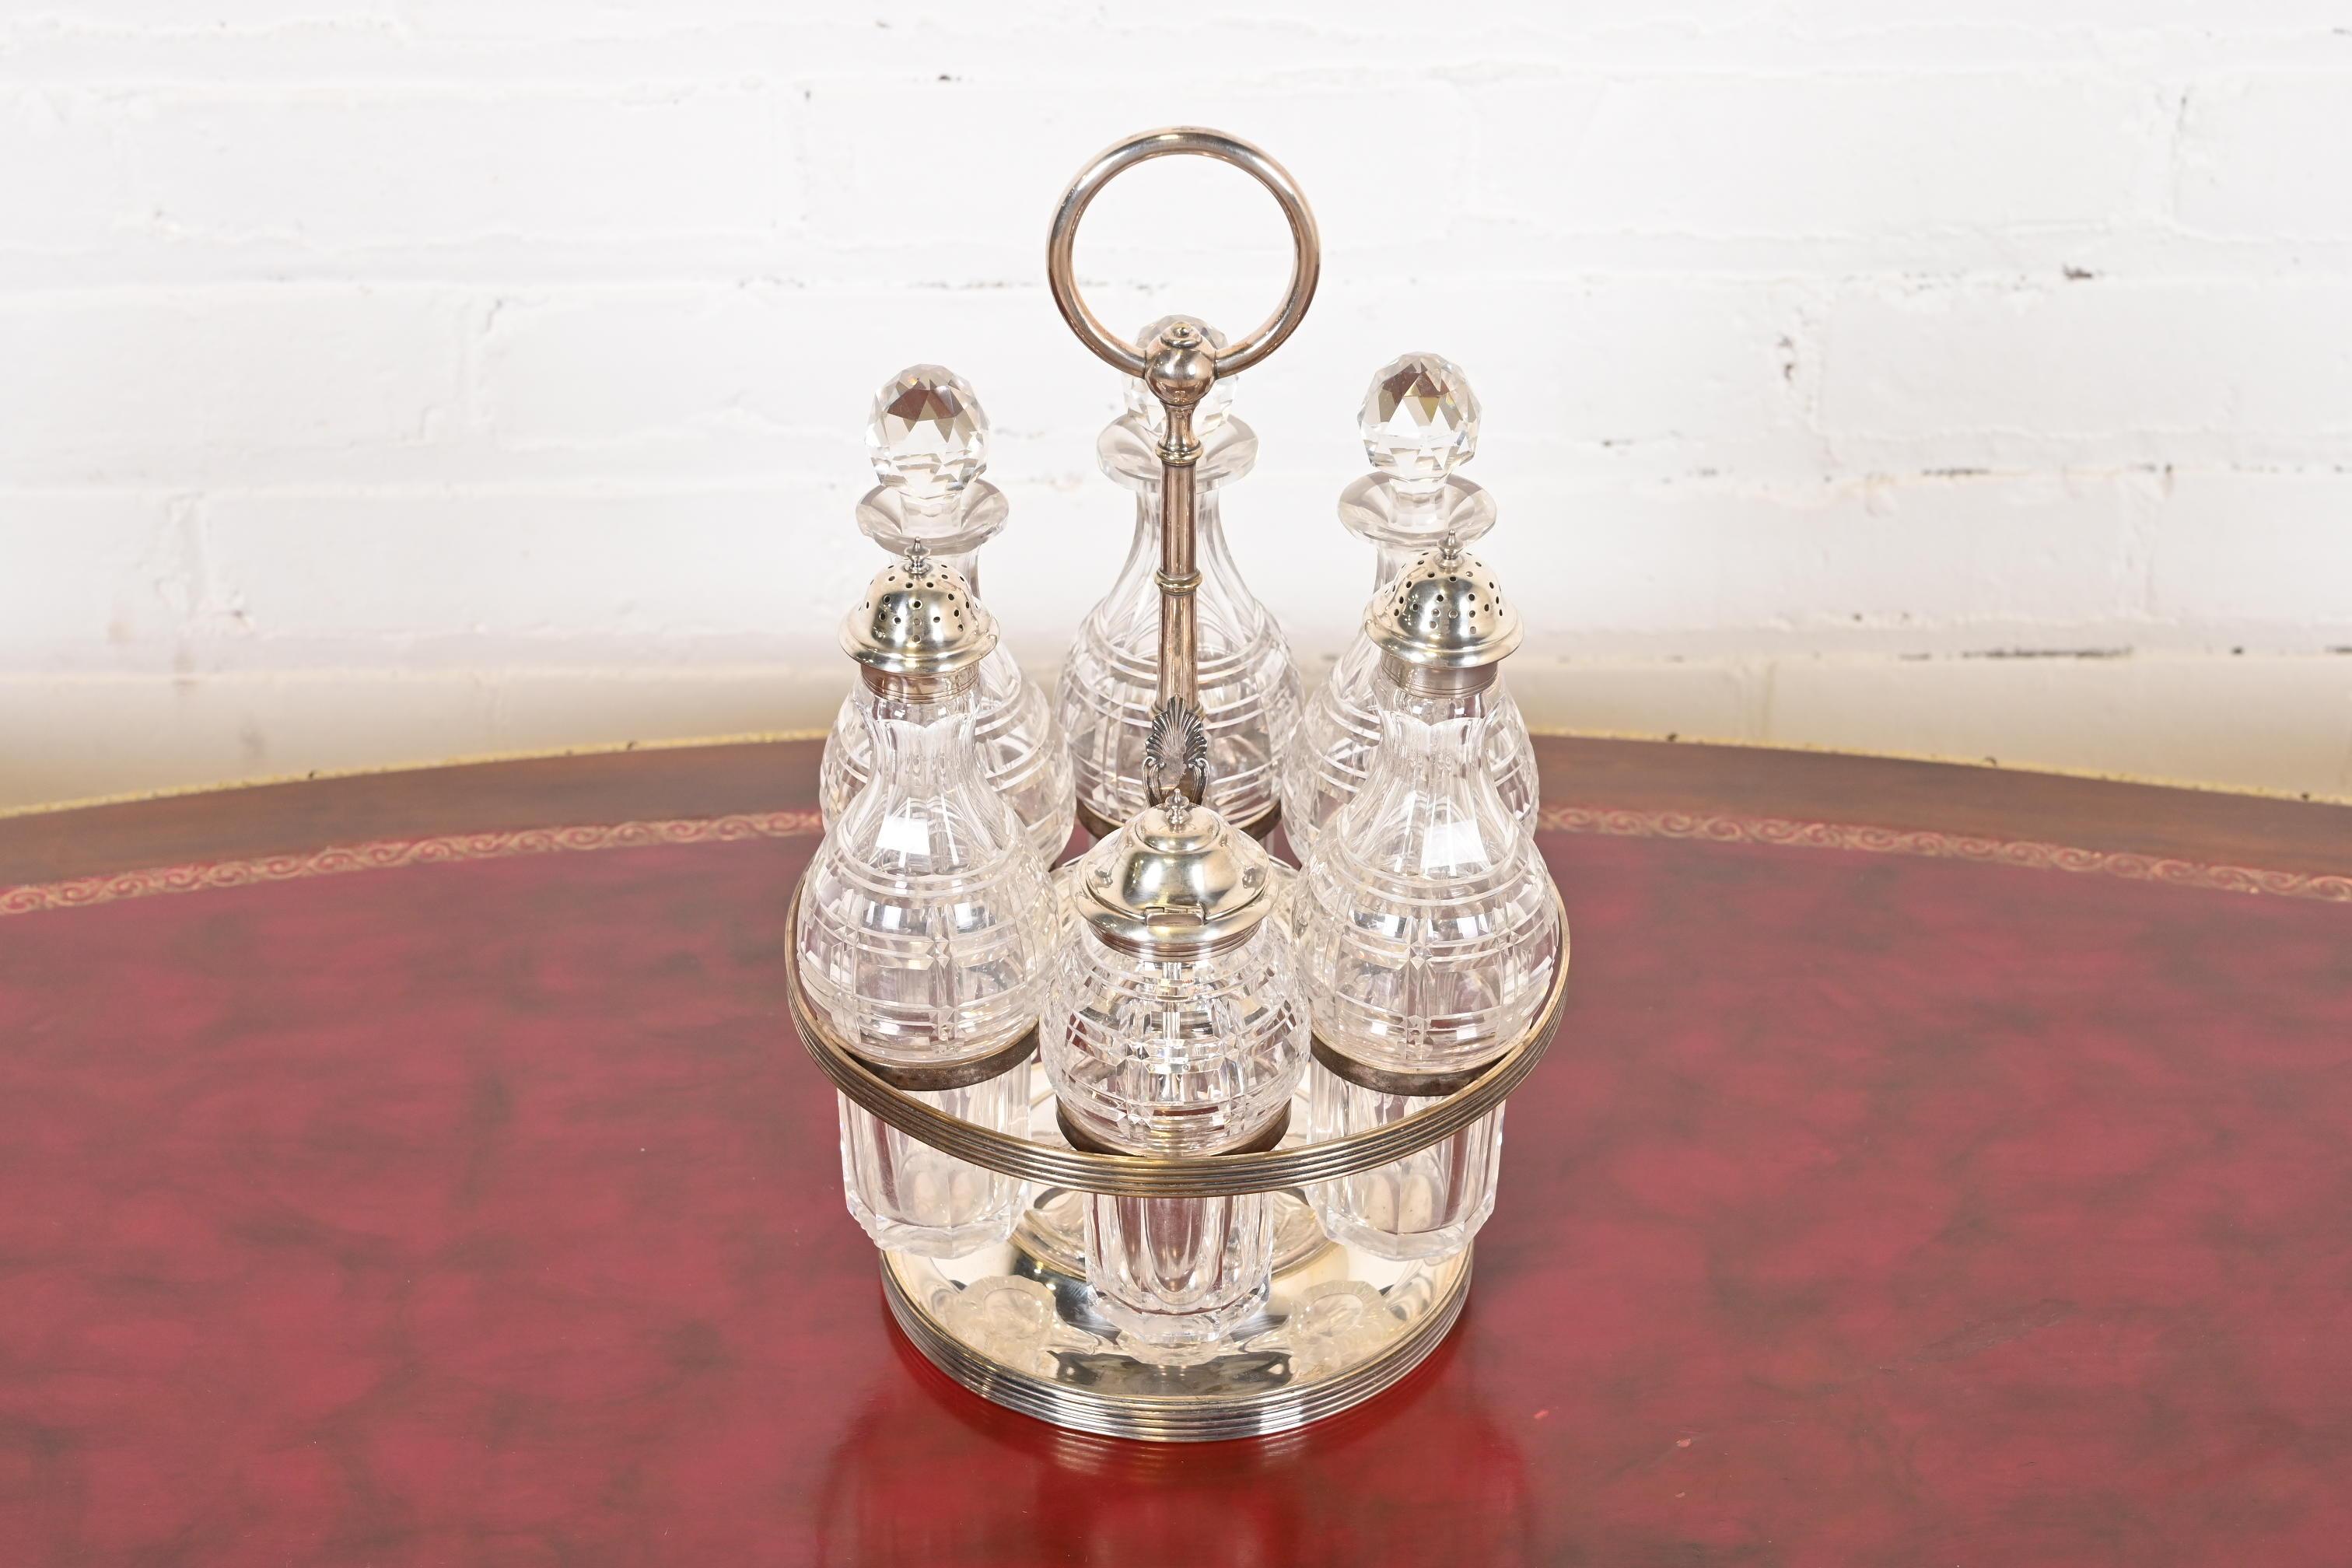 A gorgeous seven-piece silver plate and crystal cruet set

By Tiffany & Co. (signed at the base)

USA, Early 20th Century

Measures: 7.25